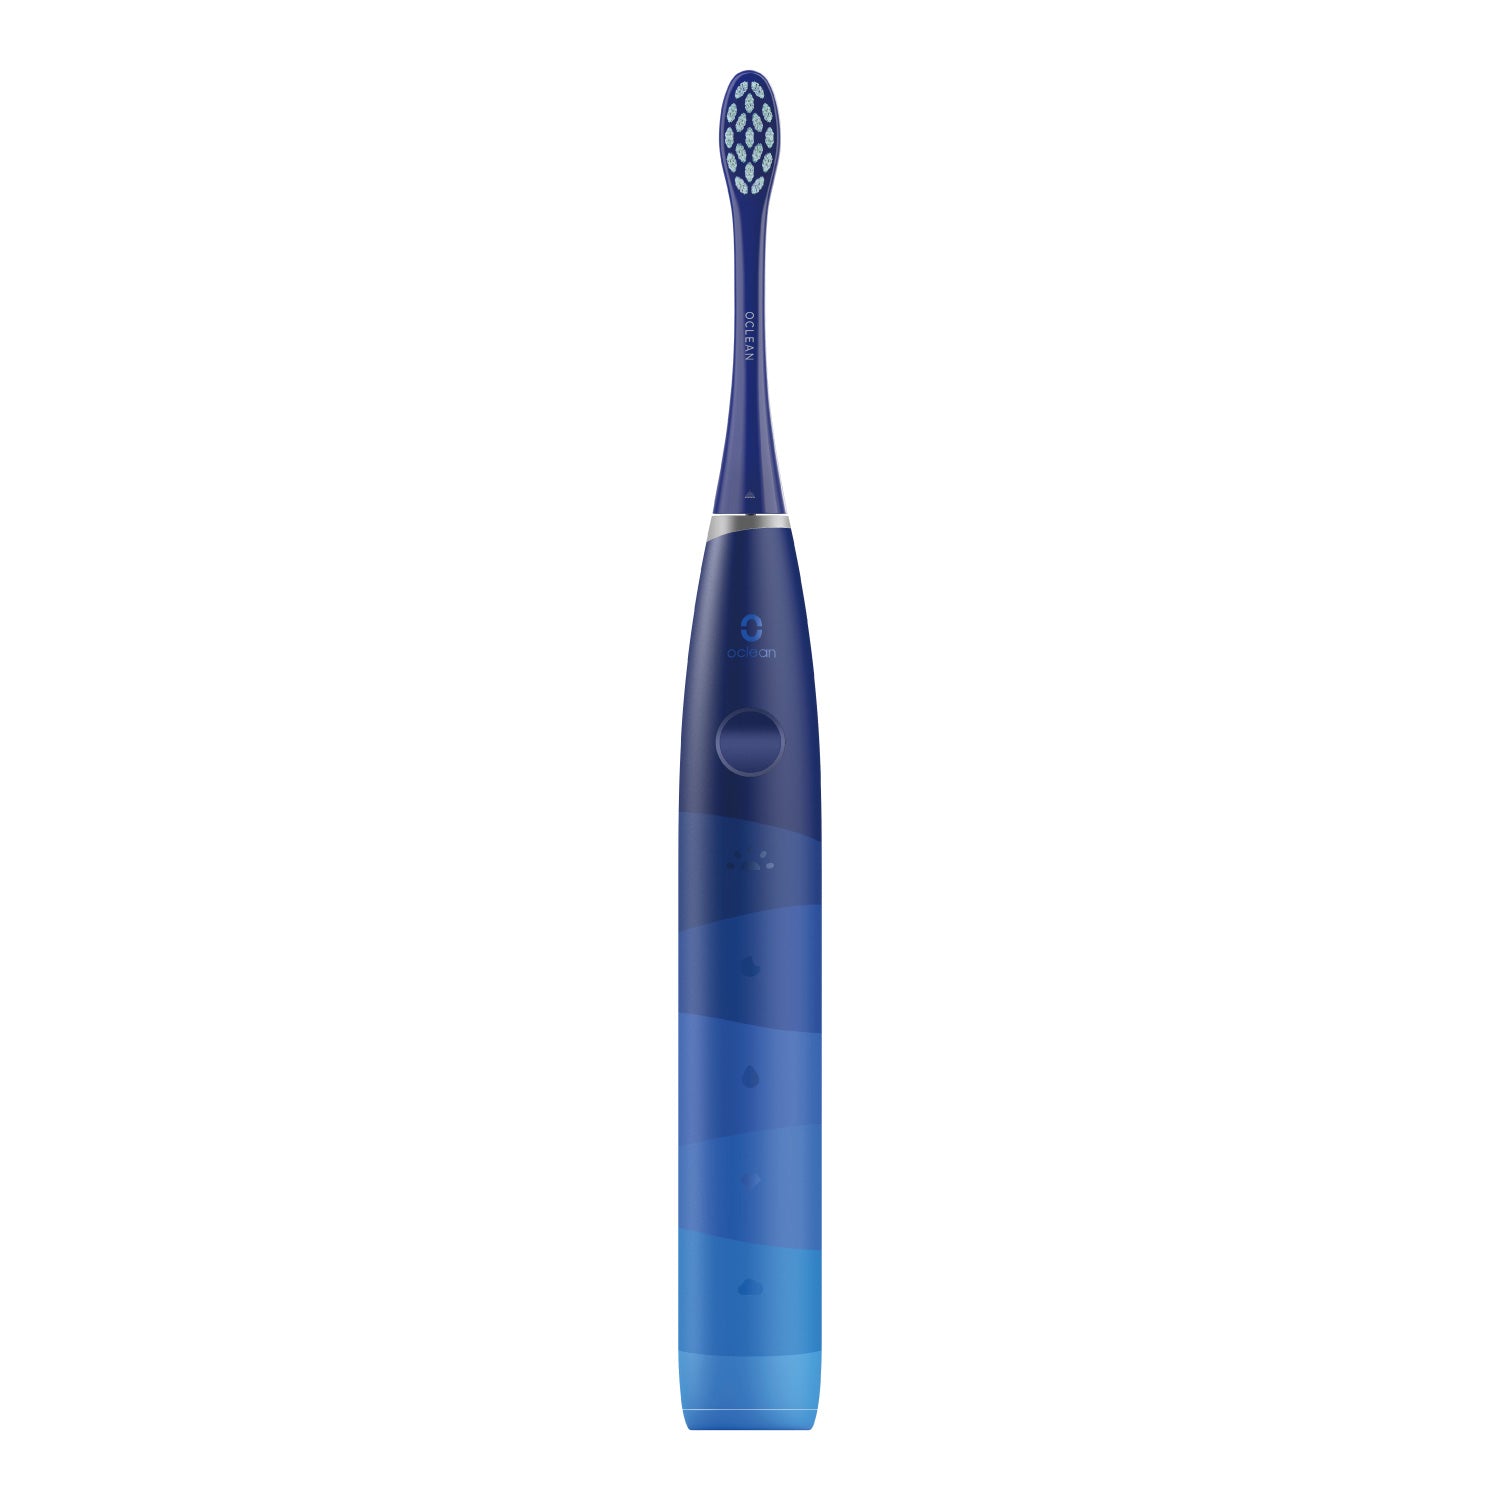 Oclean Flow Electric Sonic Toothbrush